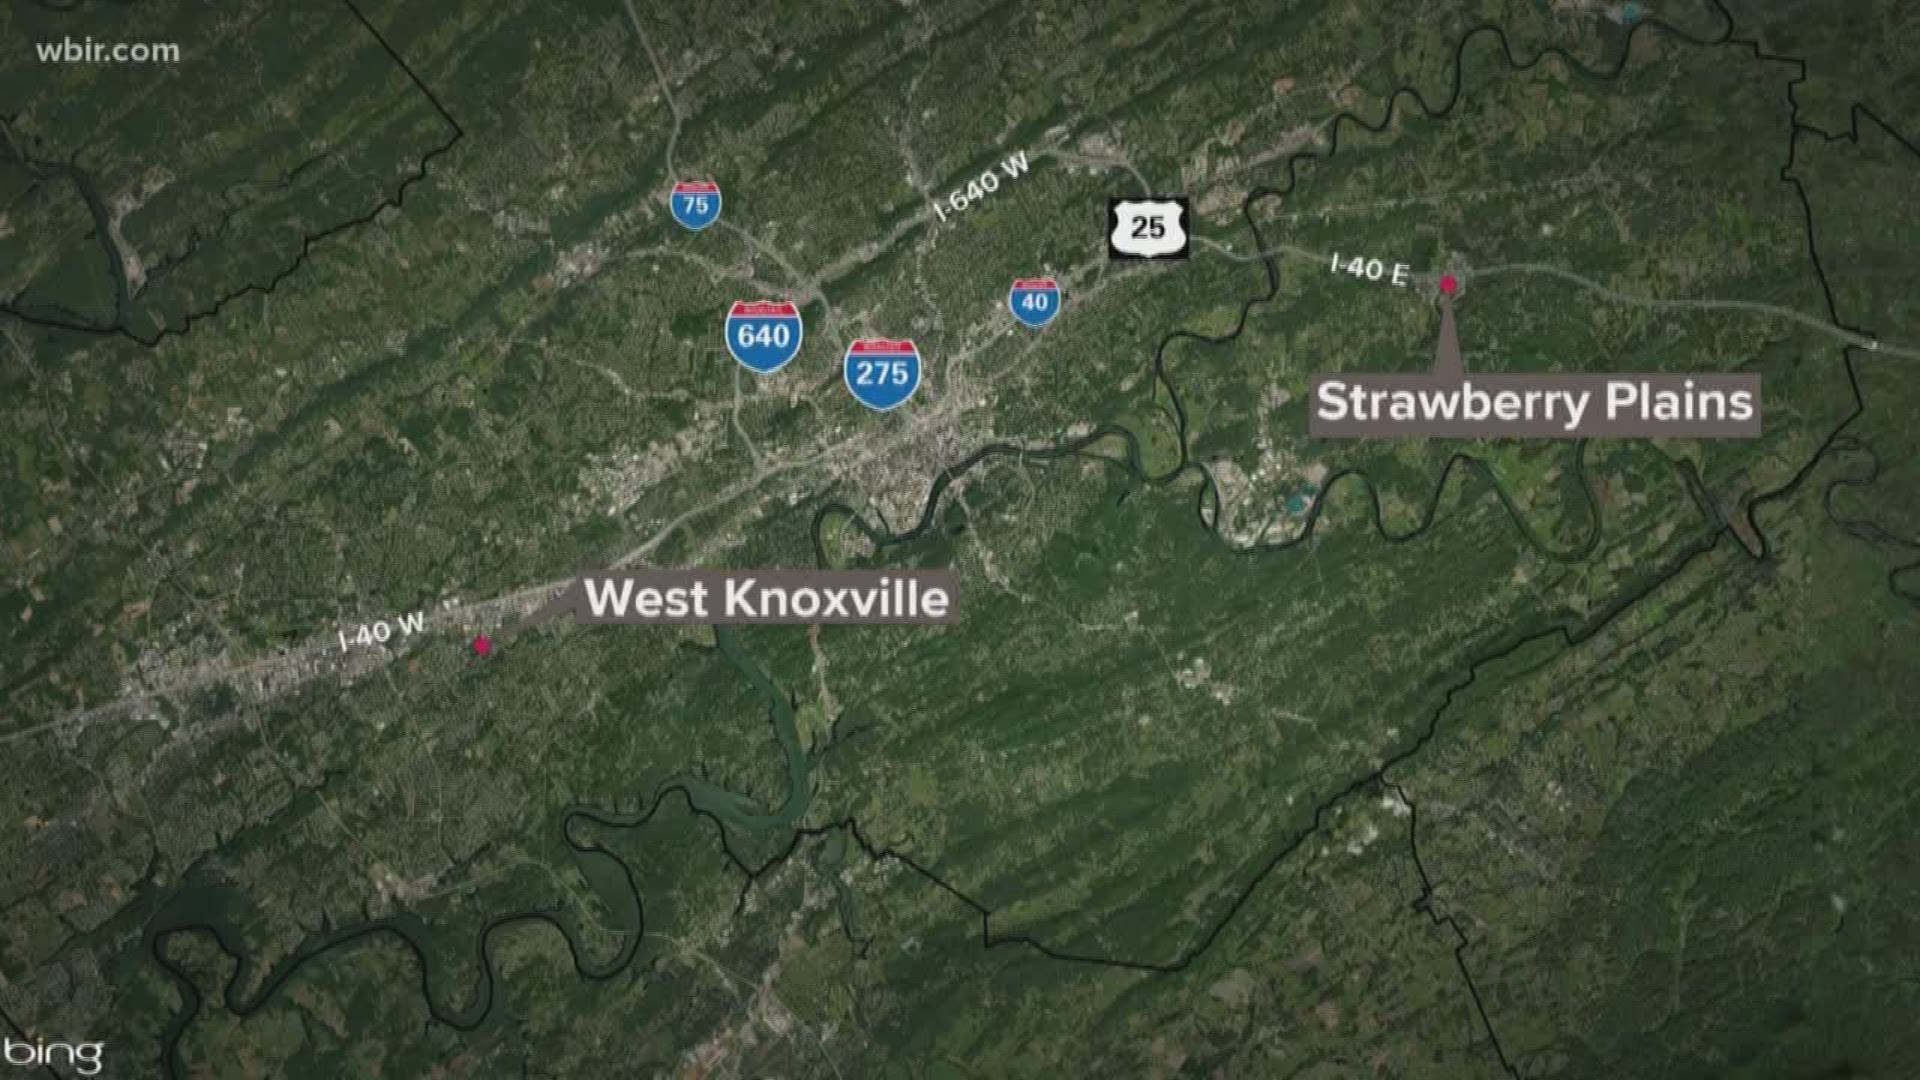 The Tennessee Department of Safety and Homeland Security says the Strawberry Plains and the West Knoxville locations are now full-service driver services centers.